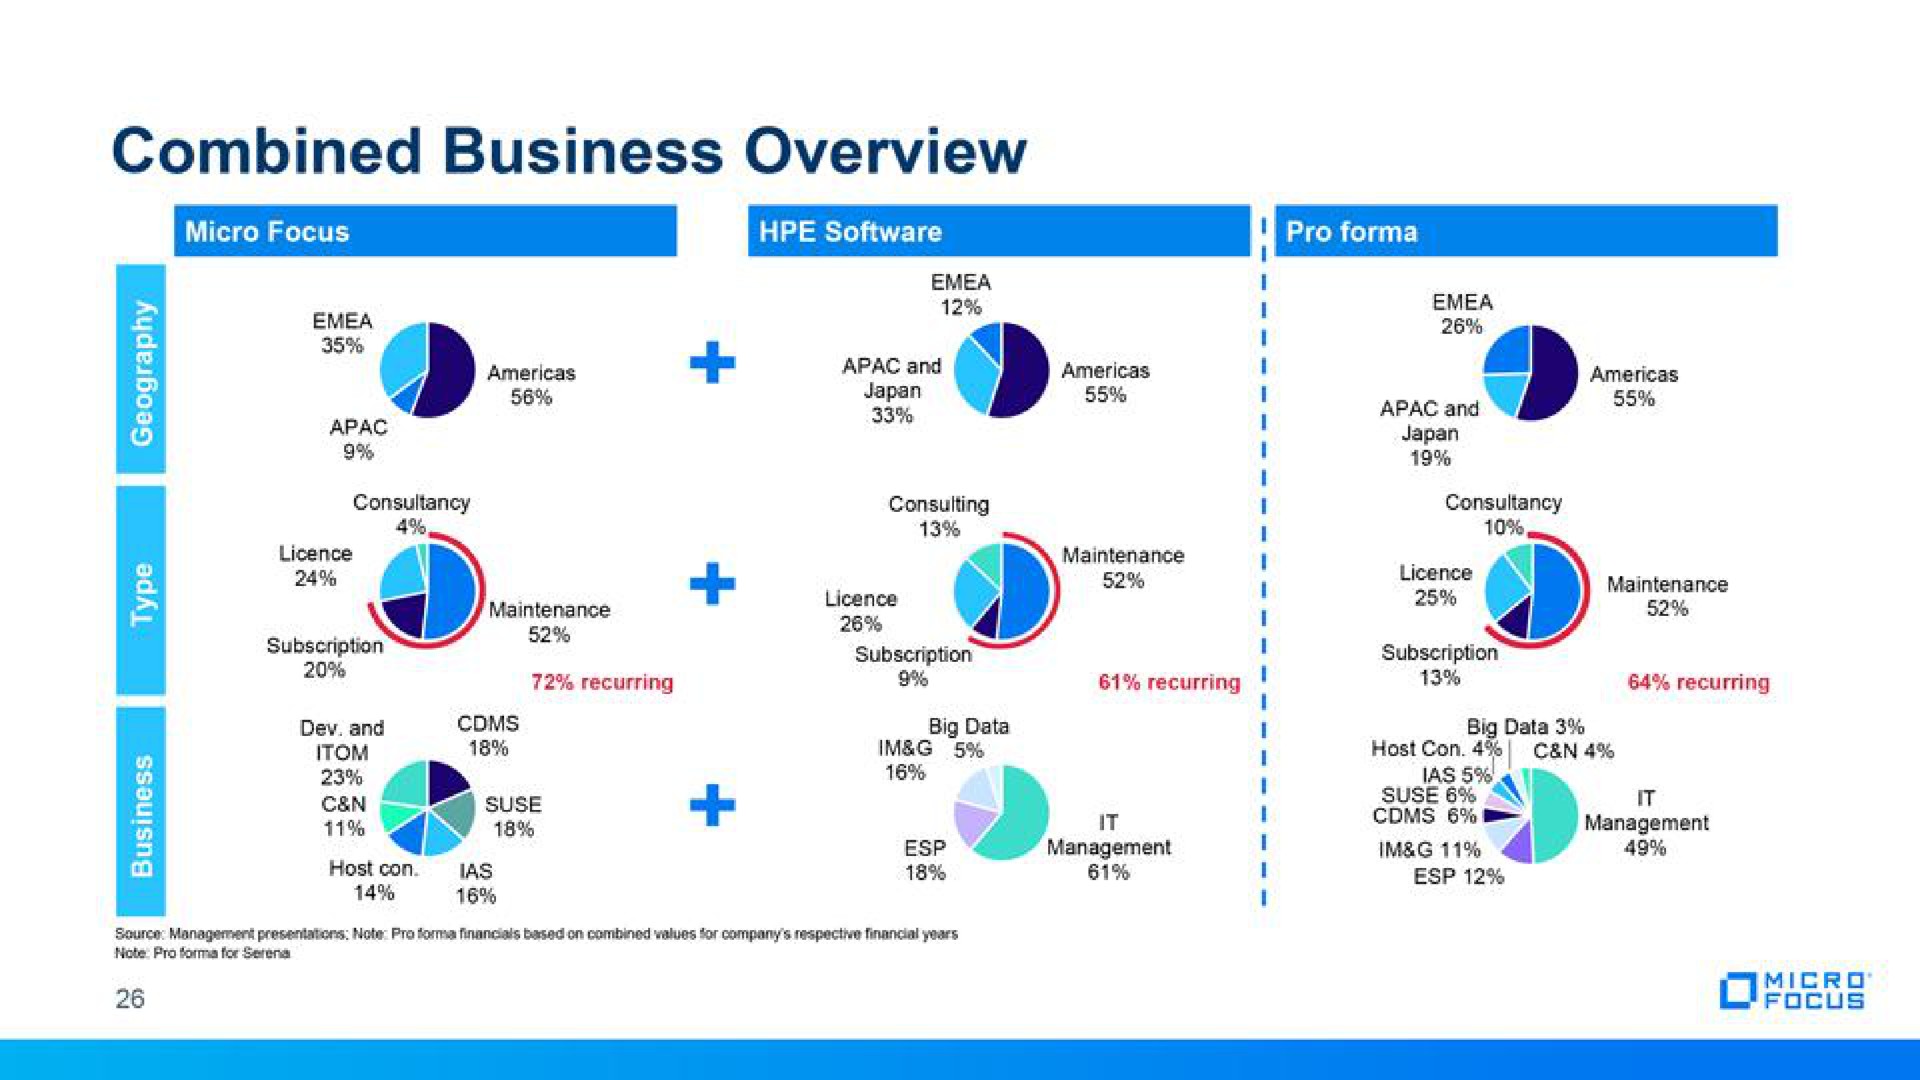 combined business overview | Micro Focus